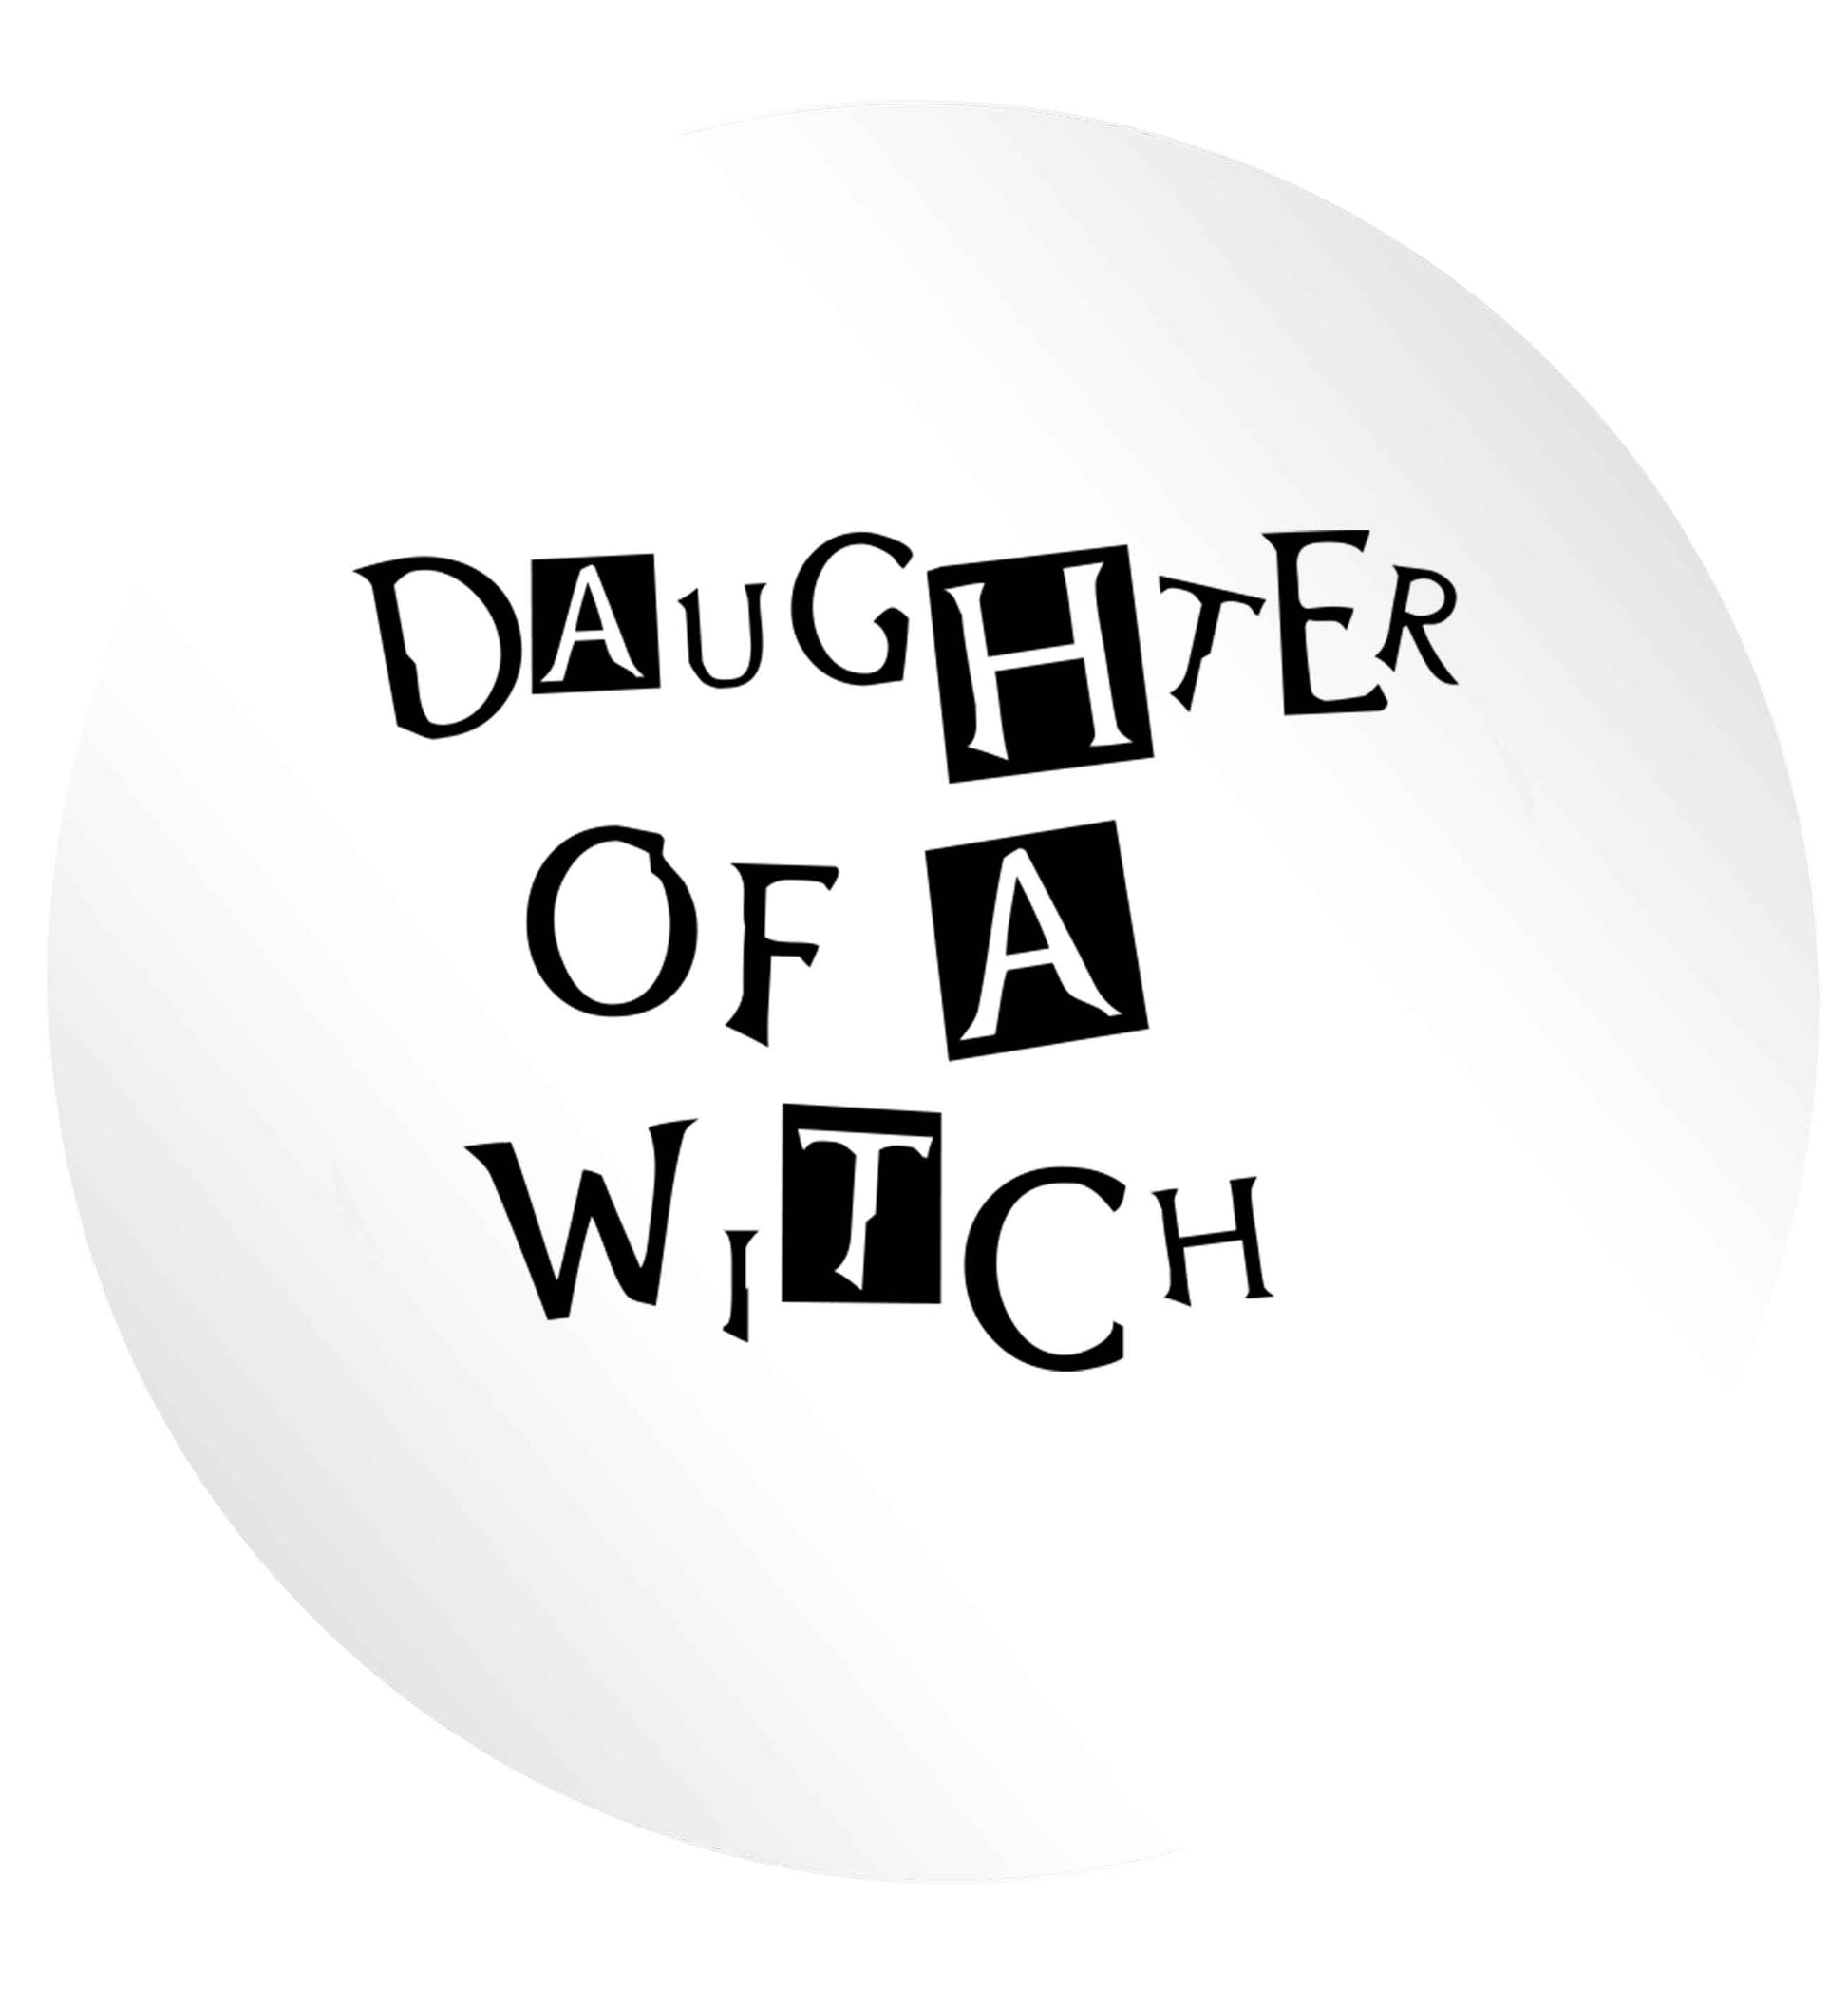 Daughter of a witch 24 @ 45mm matt circle stickers